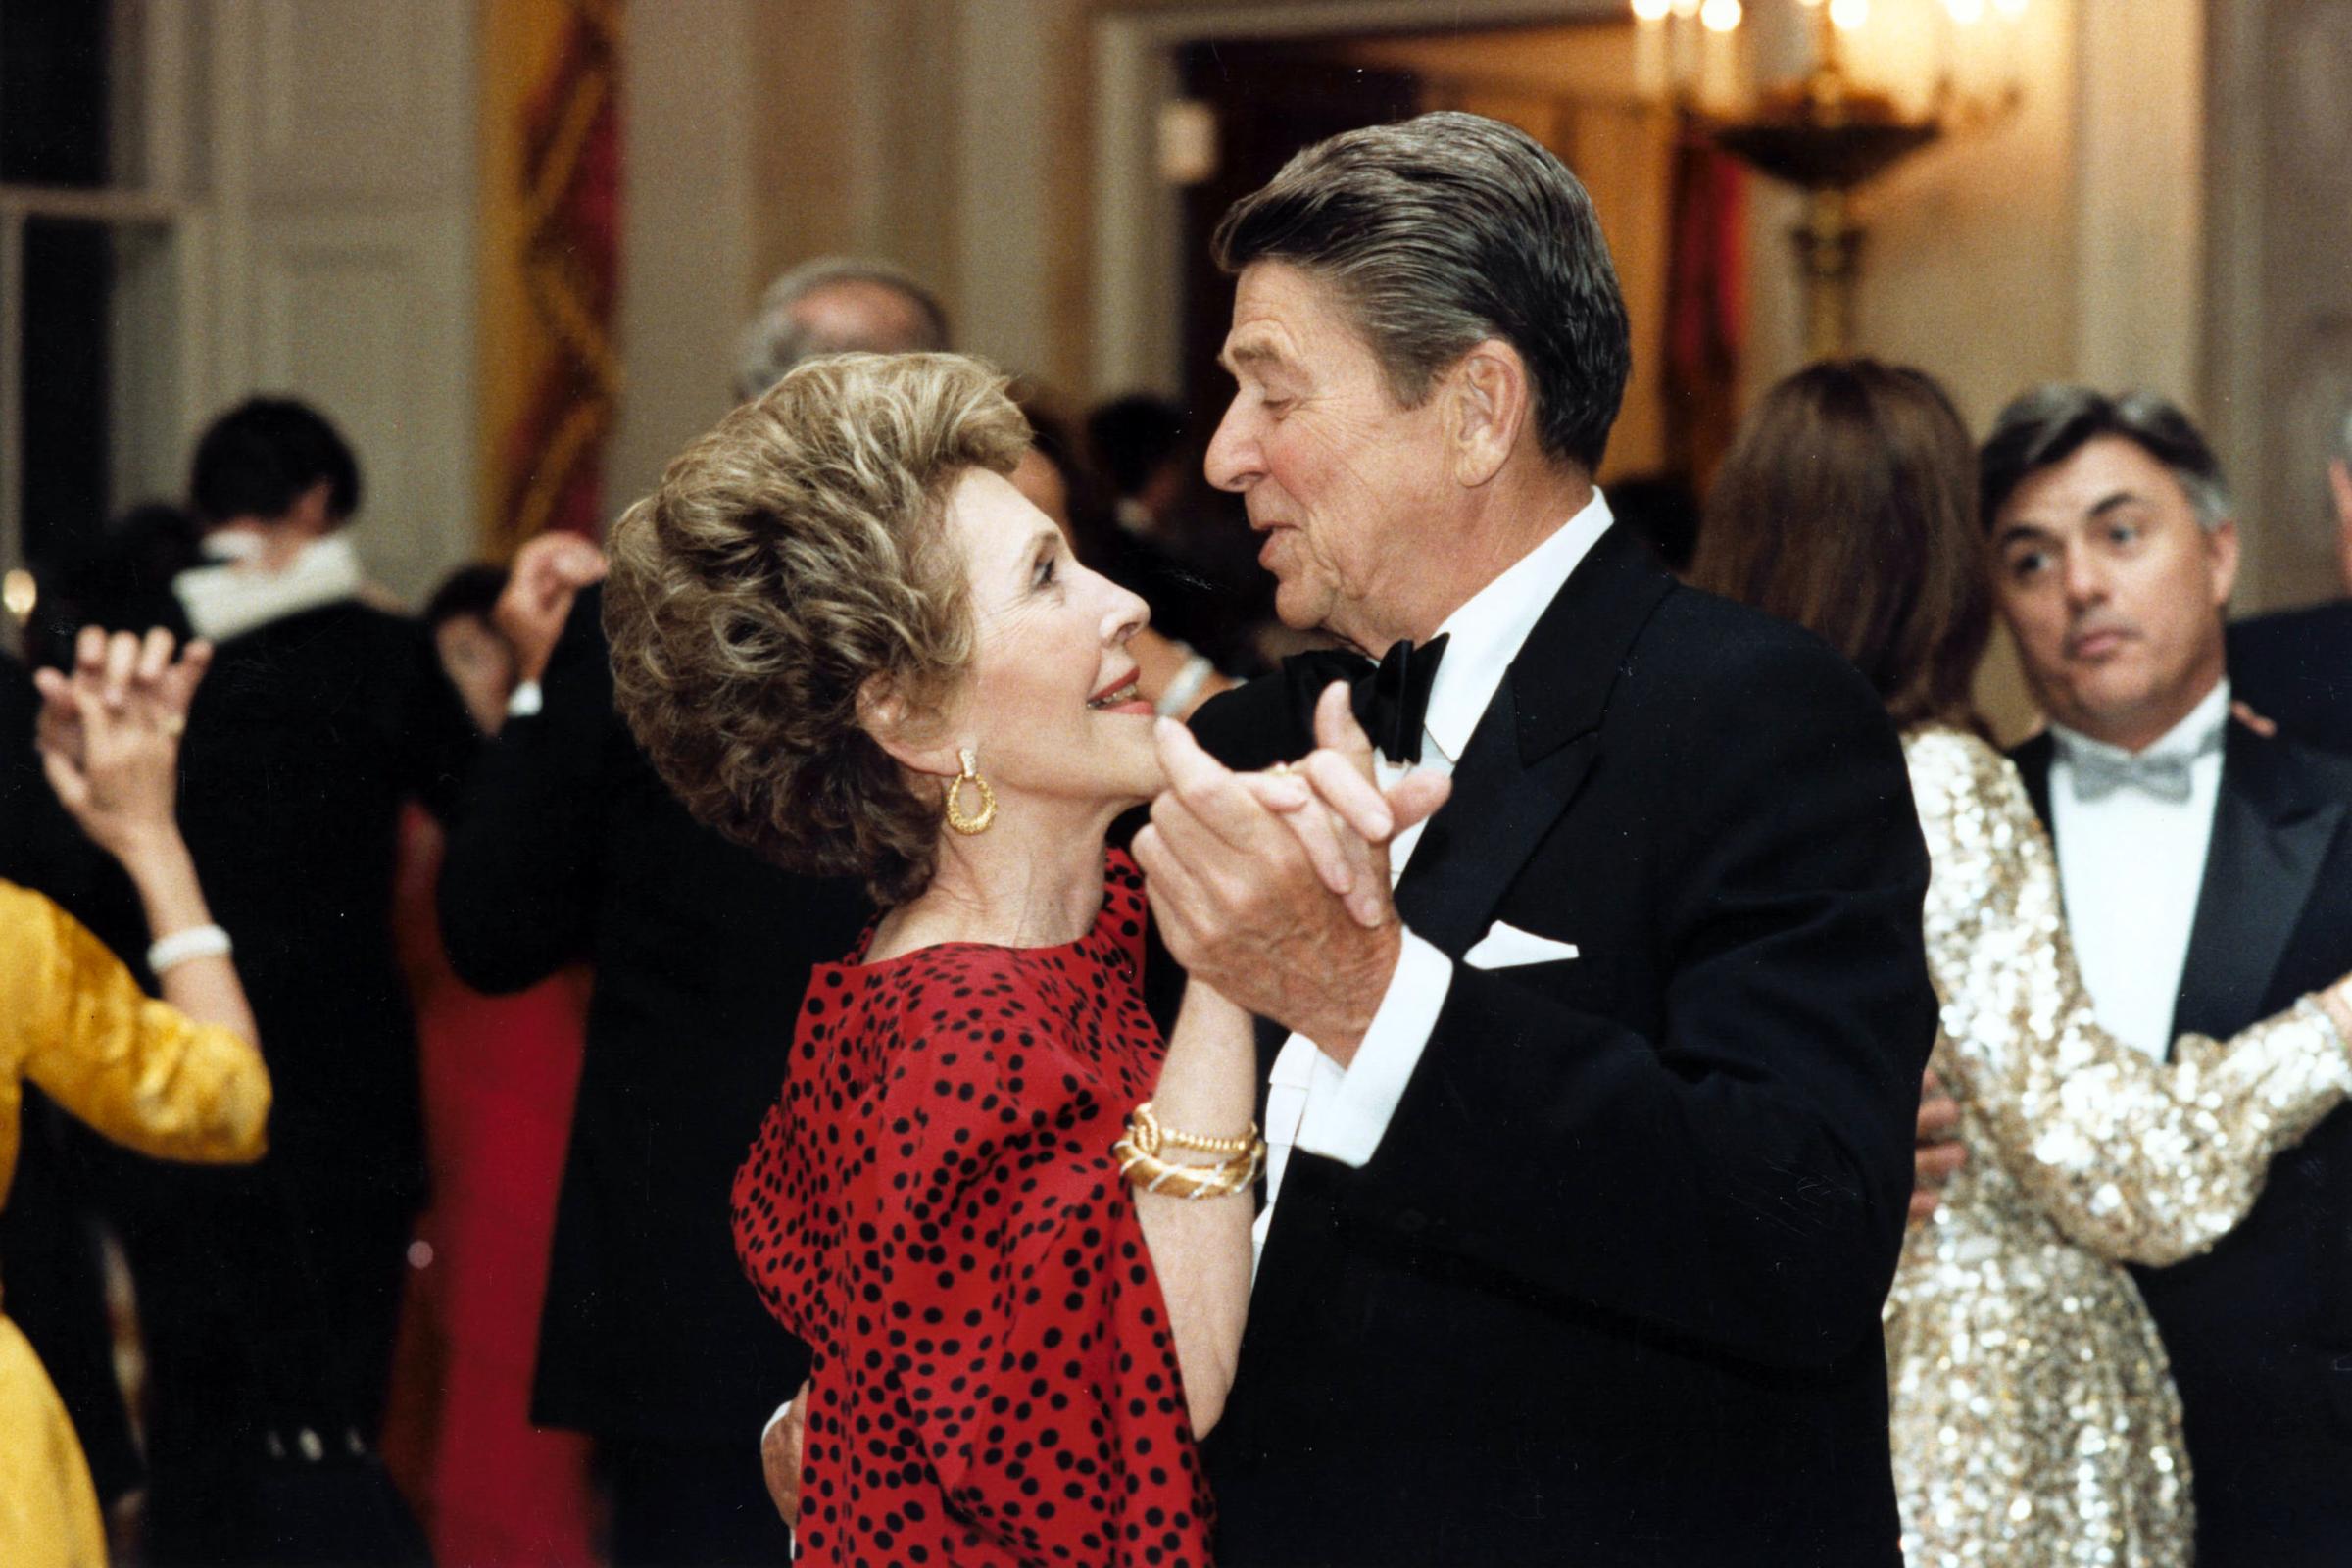 President Ronald Reagan dances with First Lady Nancy Reagan at the State Dinner for President Bendjedid of Algeria on April 17, 1985.